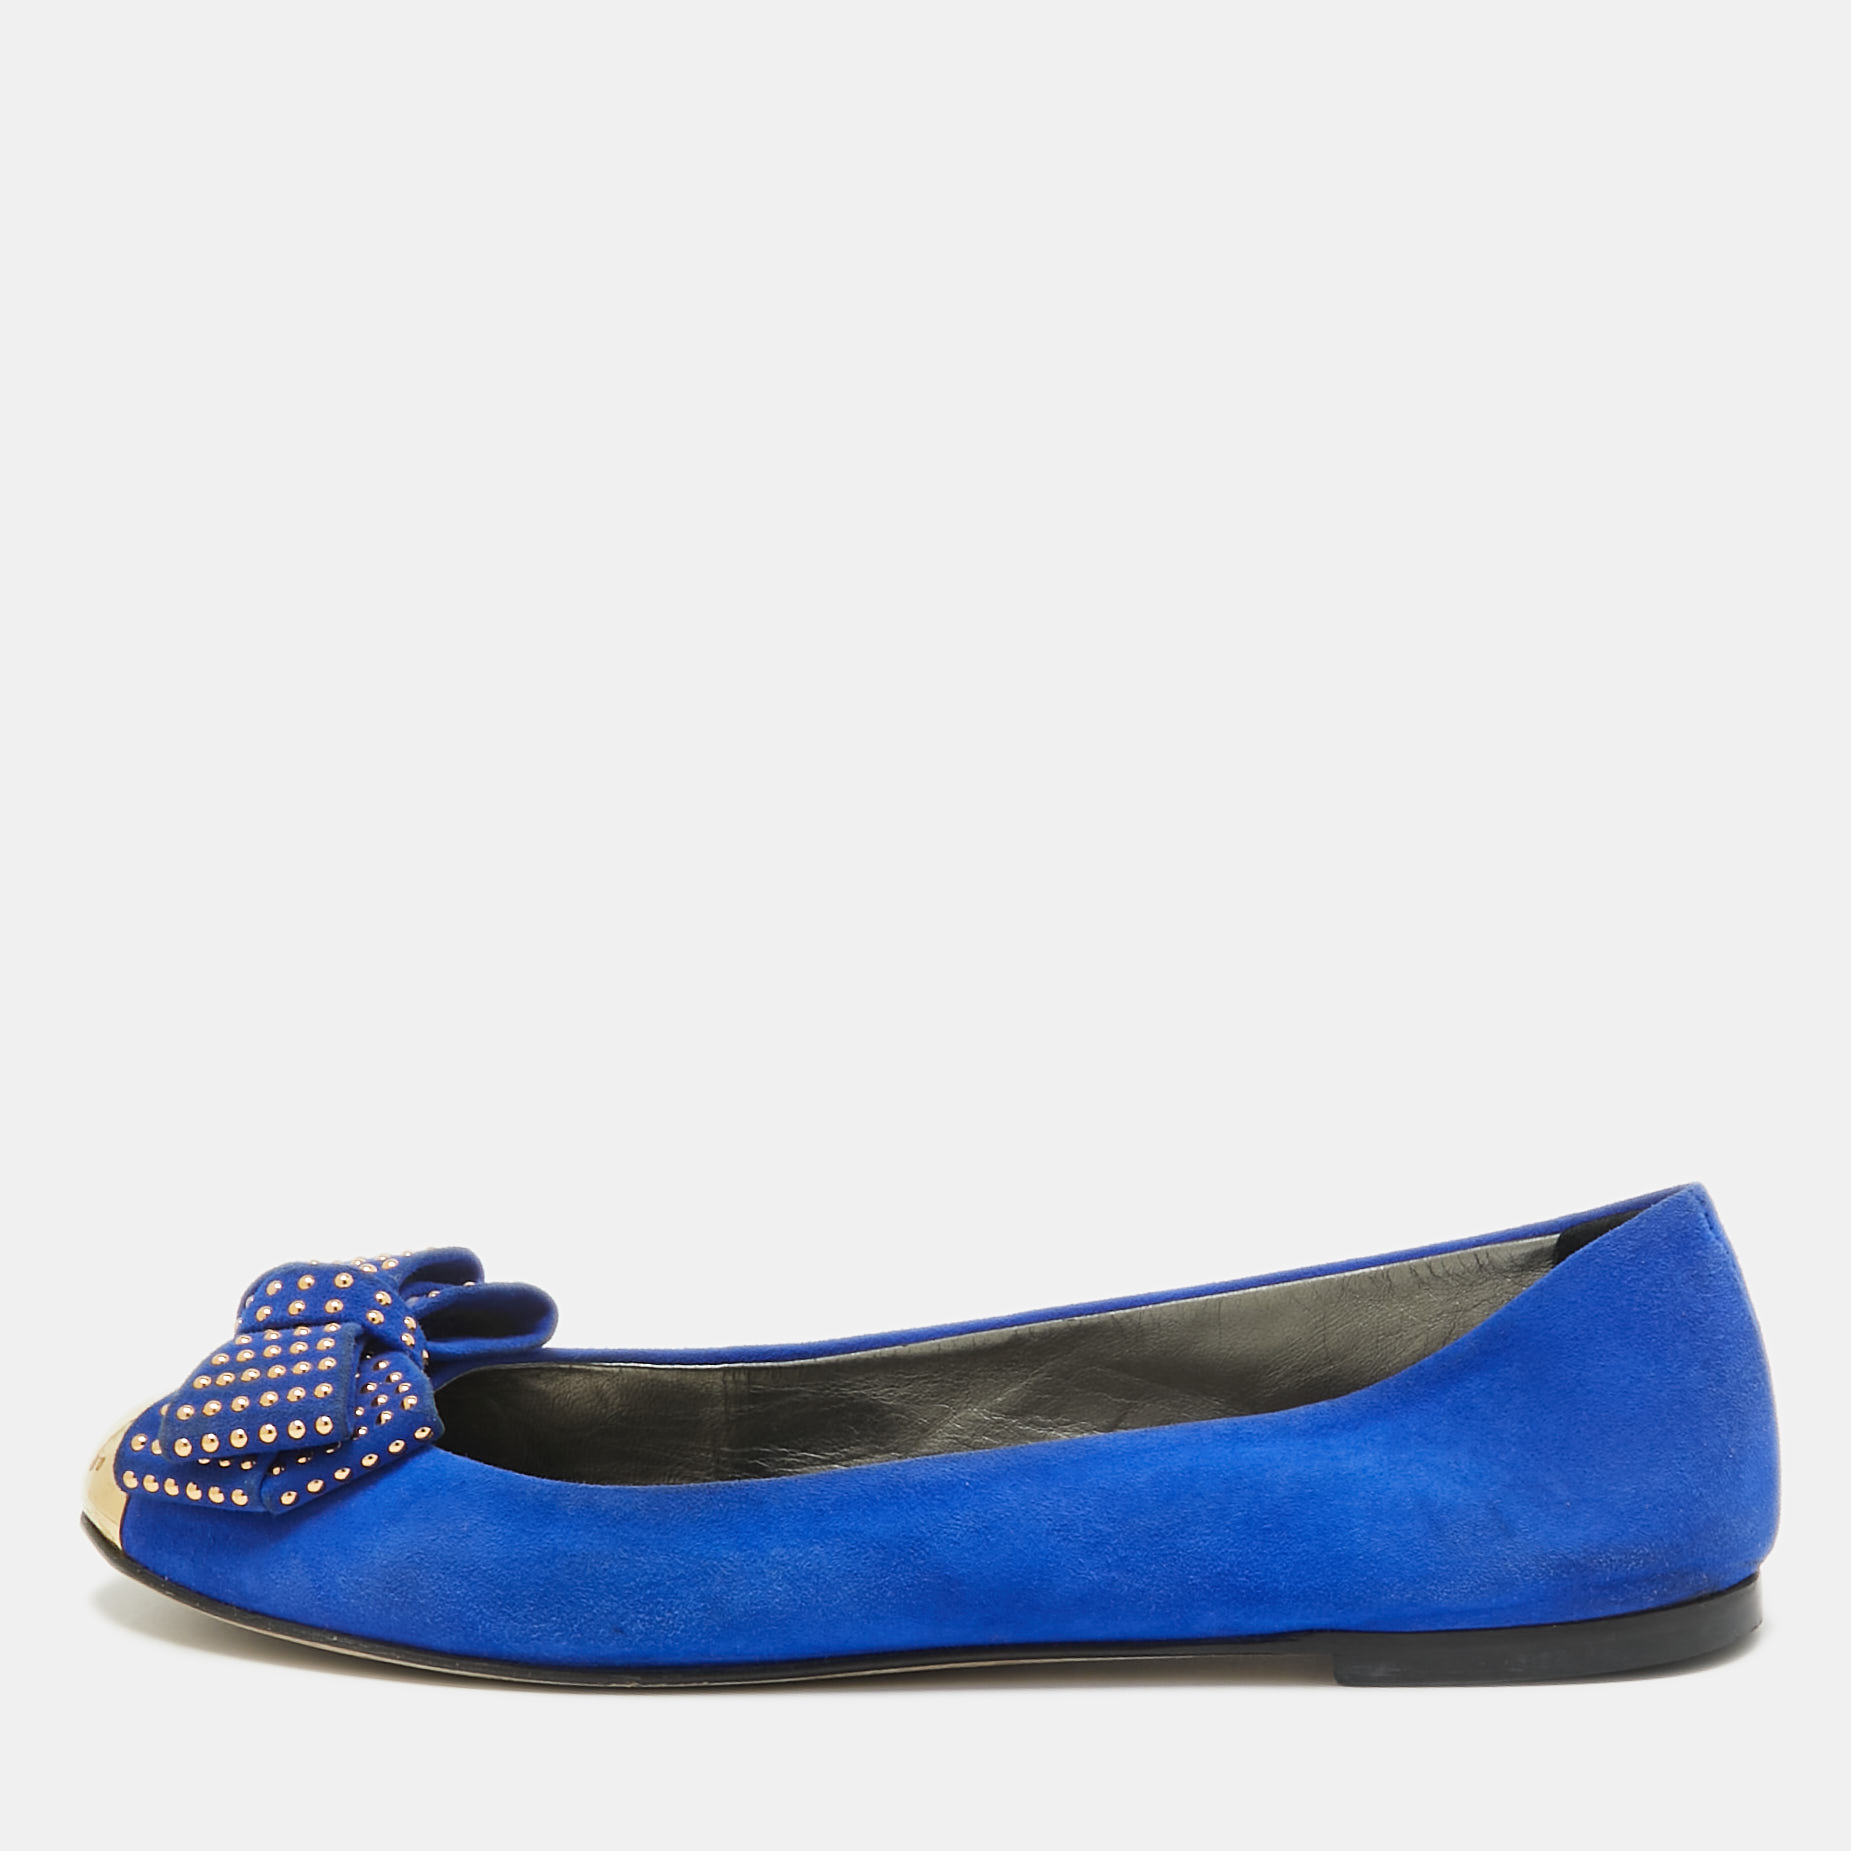 Giuseppe zanotti blue suede and gold cap toe studded bow ballet flats size 38.5